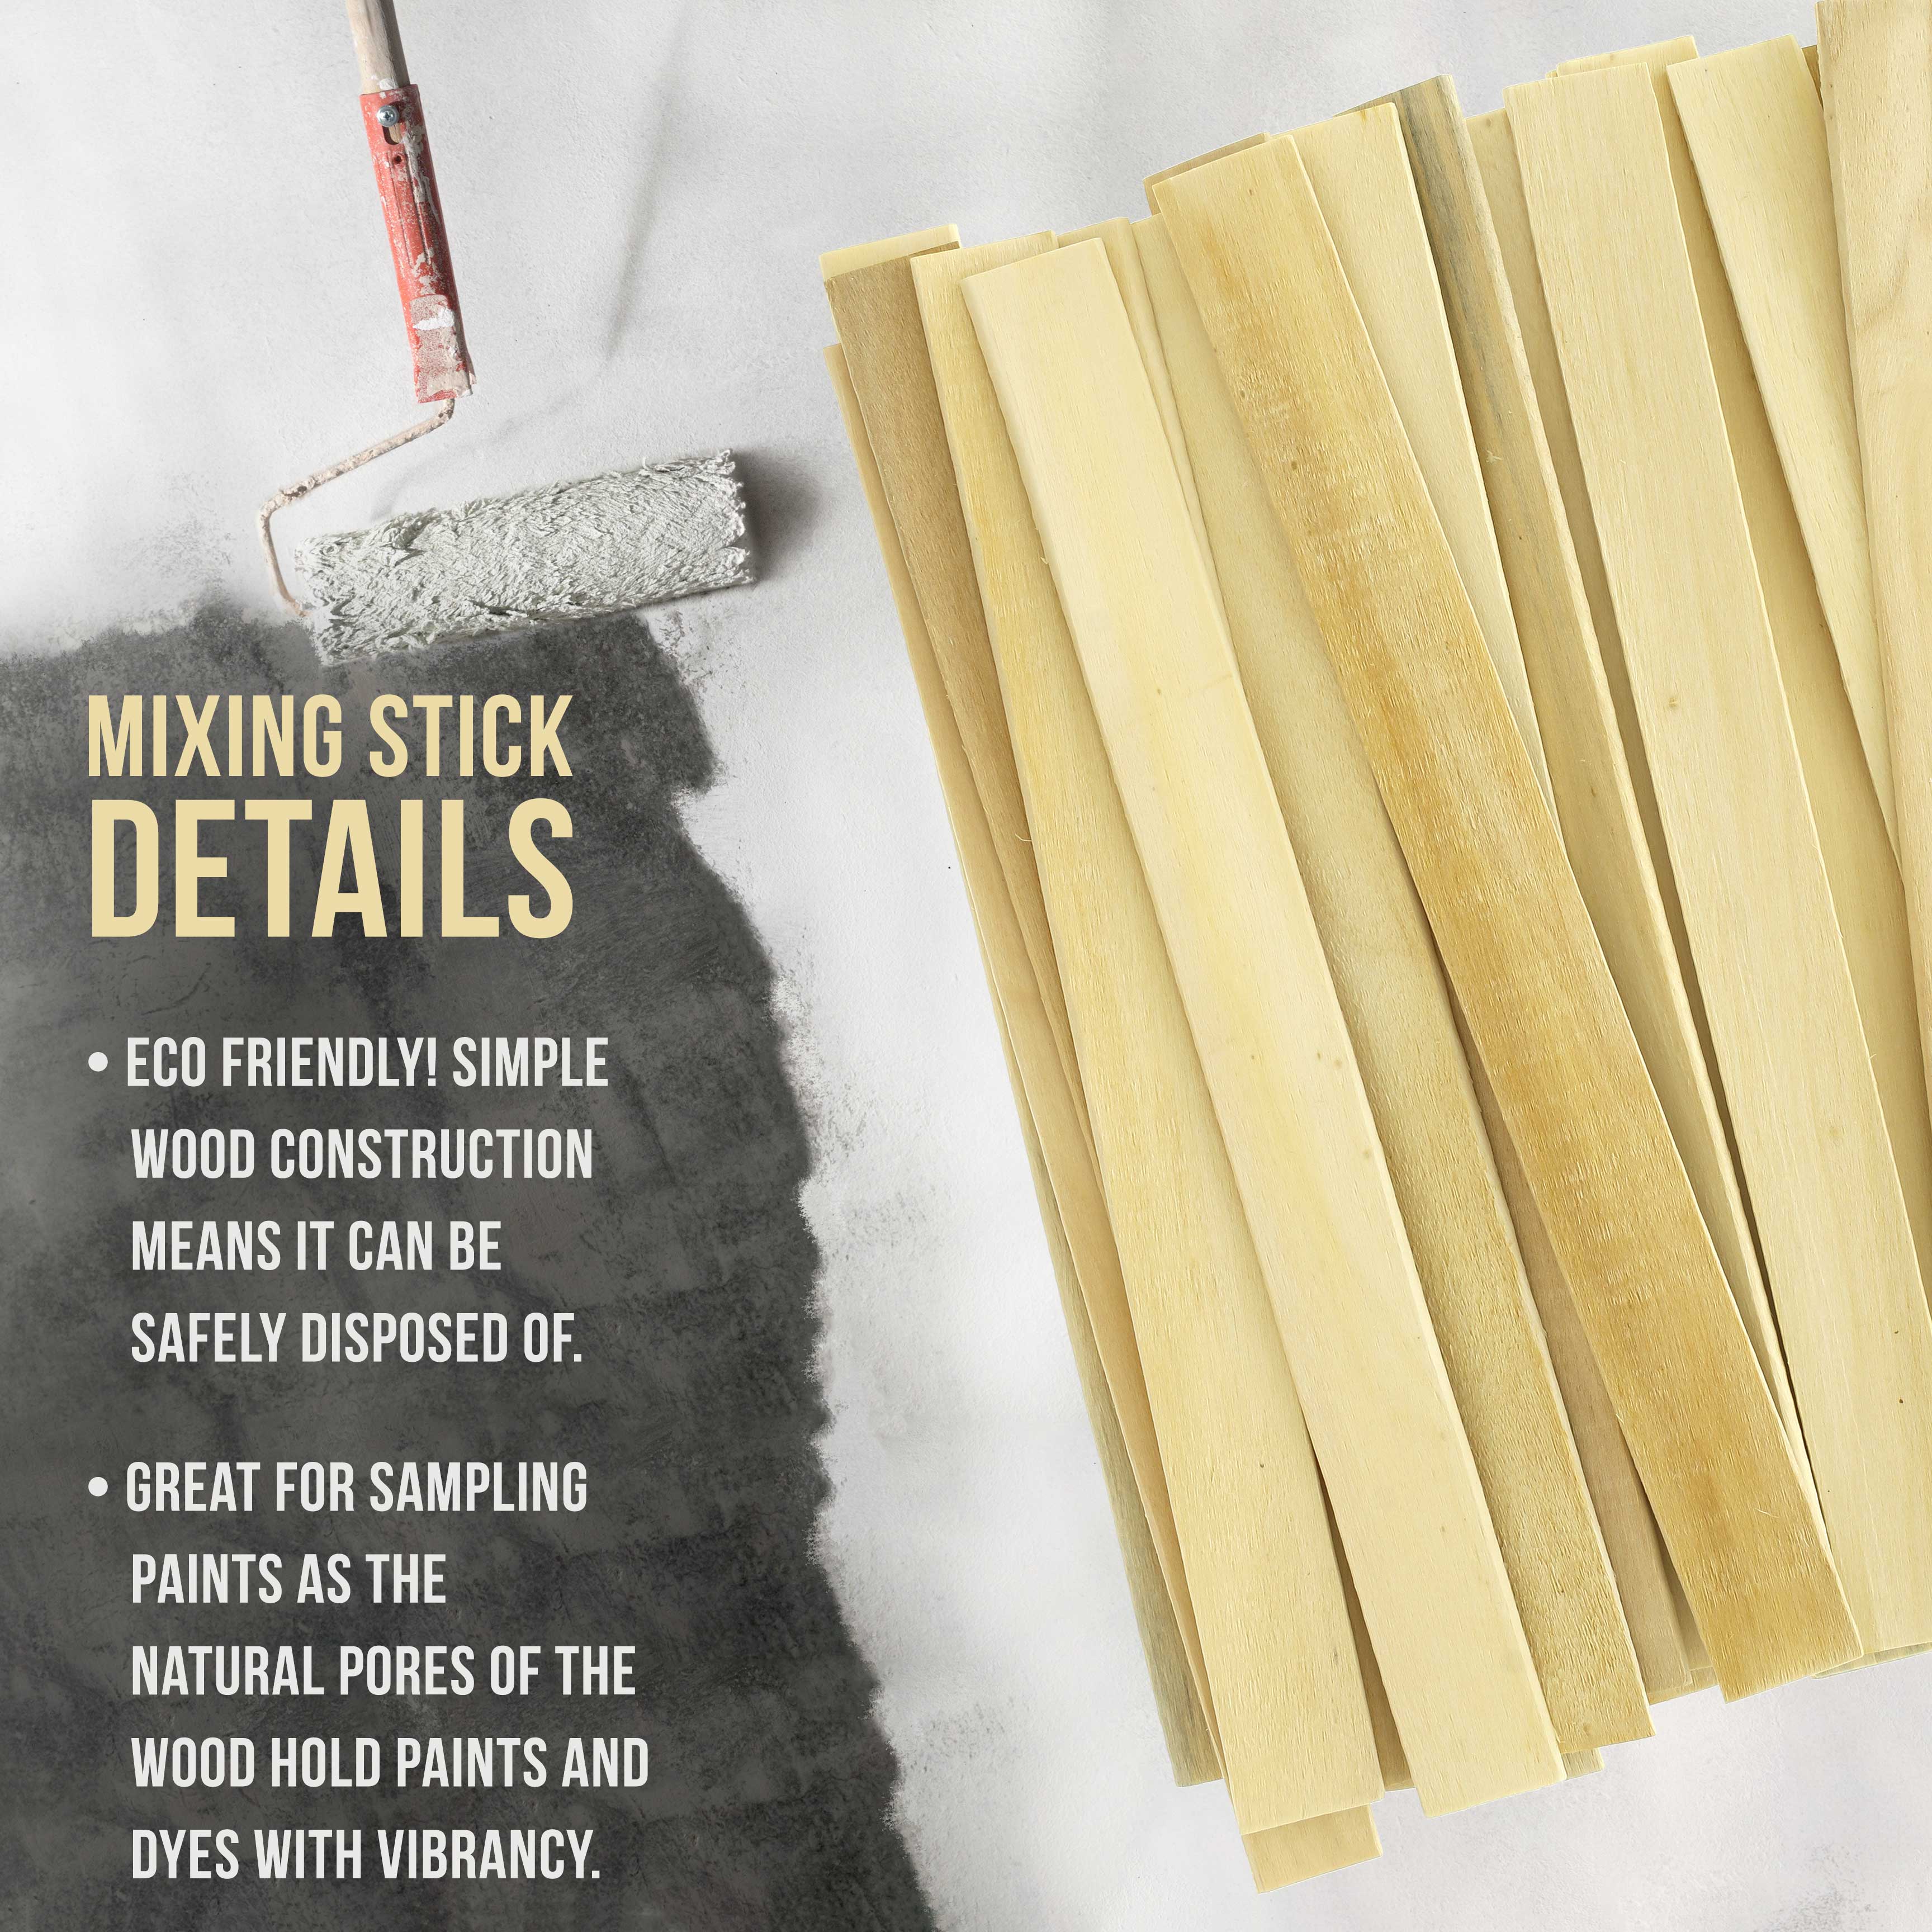 Custom Shop Craft and Paint Sticks - (Pack -100 Sticks) 12 inch Premium Grade Wood Stirrers / Paddles - Use for Wood Crafts - Paddle to Mix Epoxy